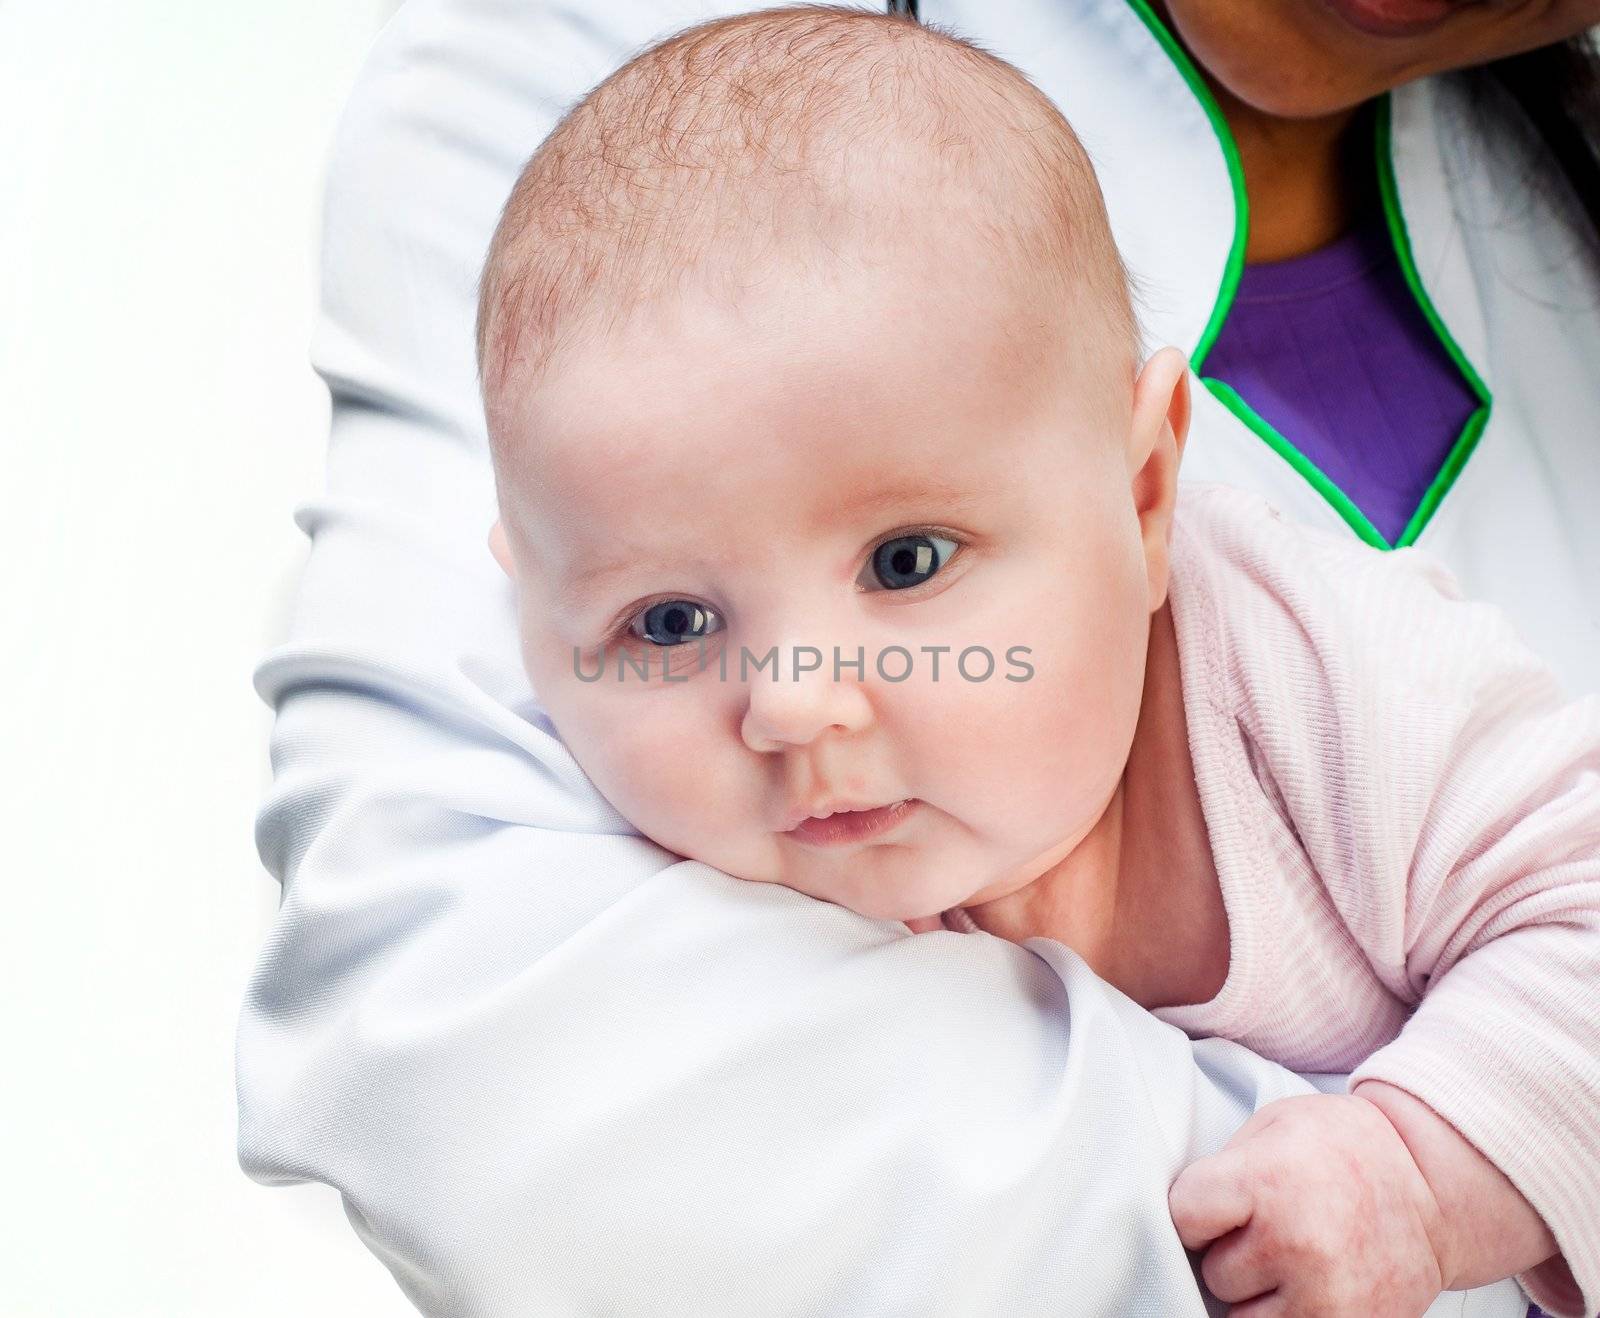 Small baby in doctors hands isolated on a white background